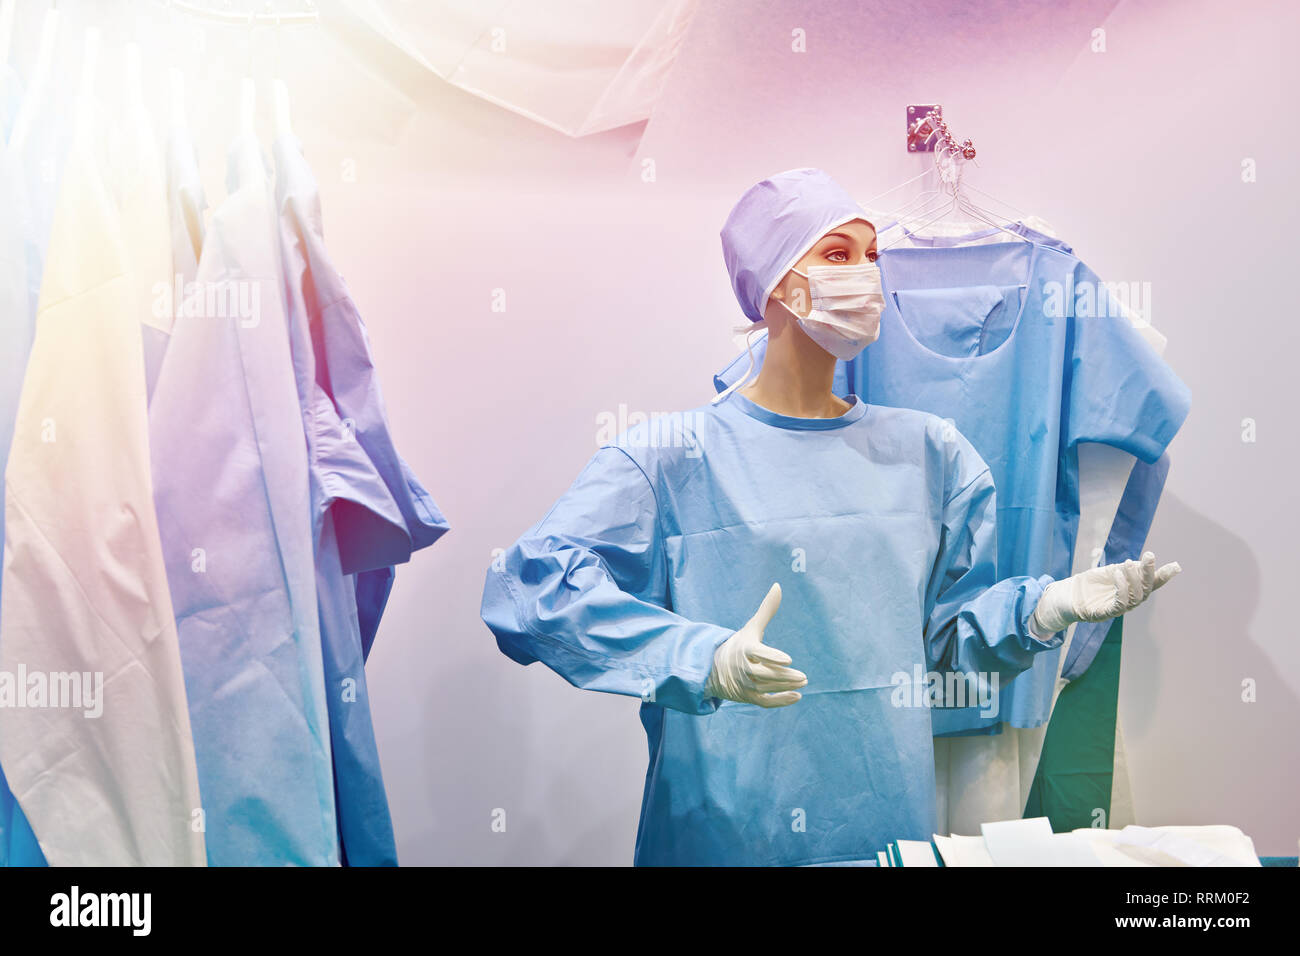 Mannequin in surgical gown in store Stock Photo